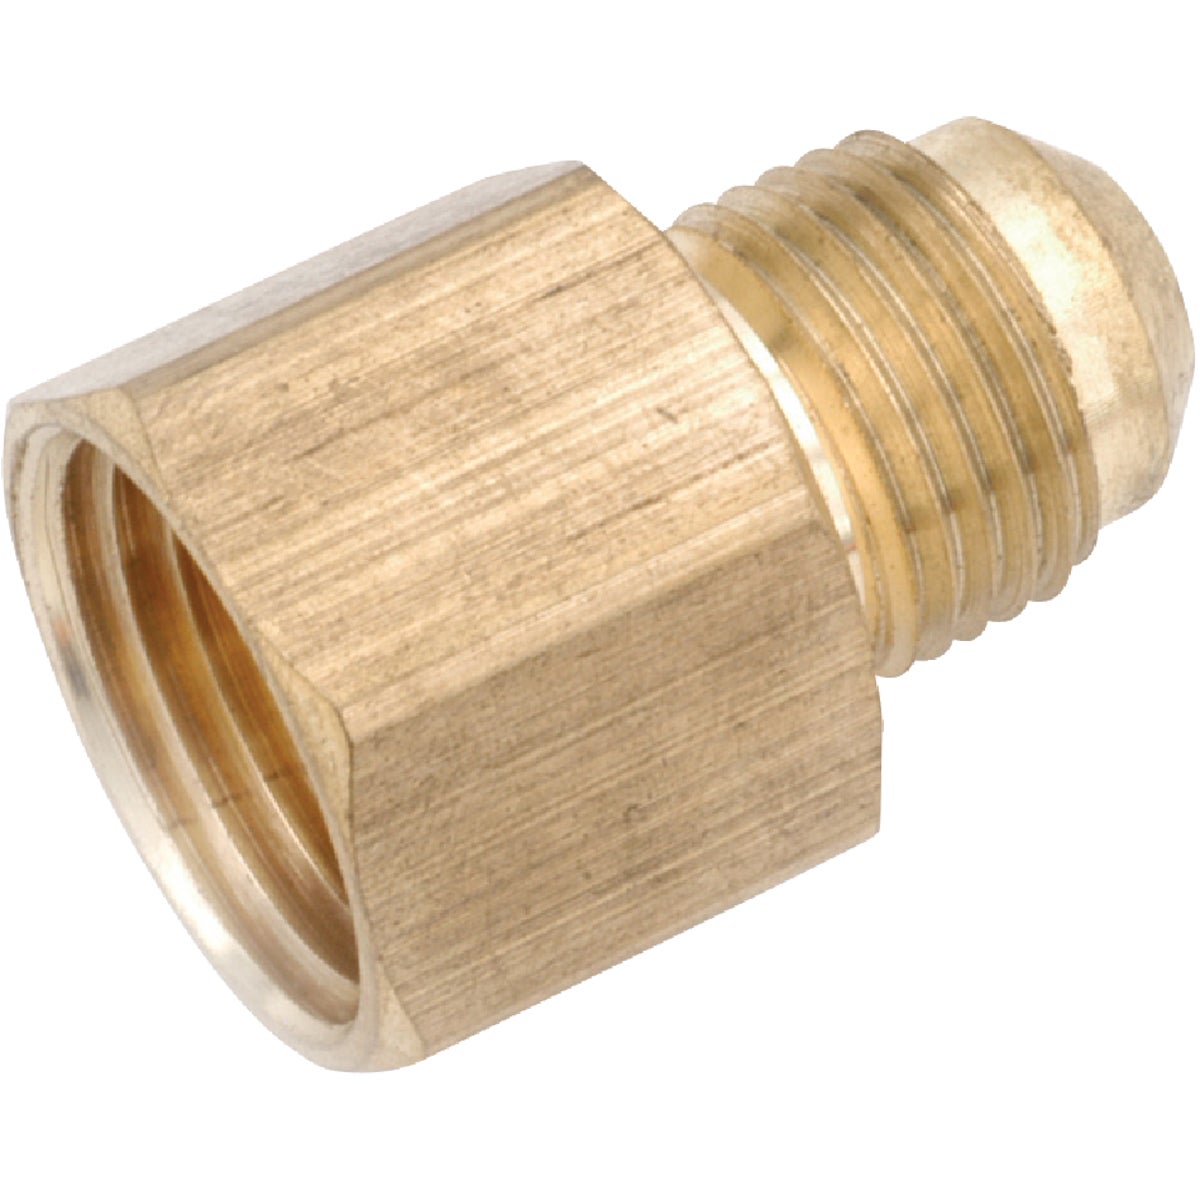 Anderson Metals 3/8 In. x 1/2 In. Brass Low Lead Female Flare Connector